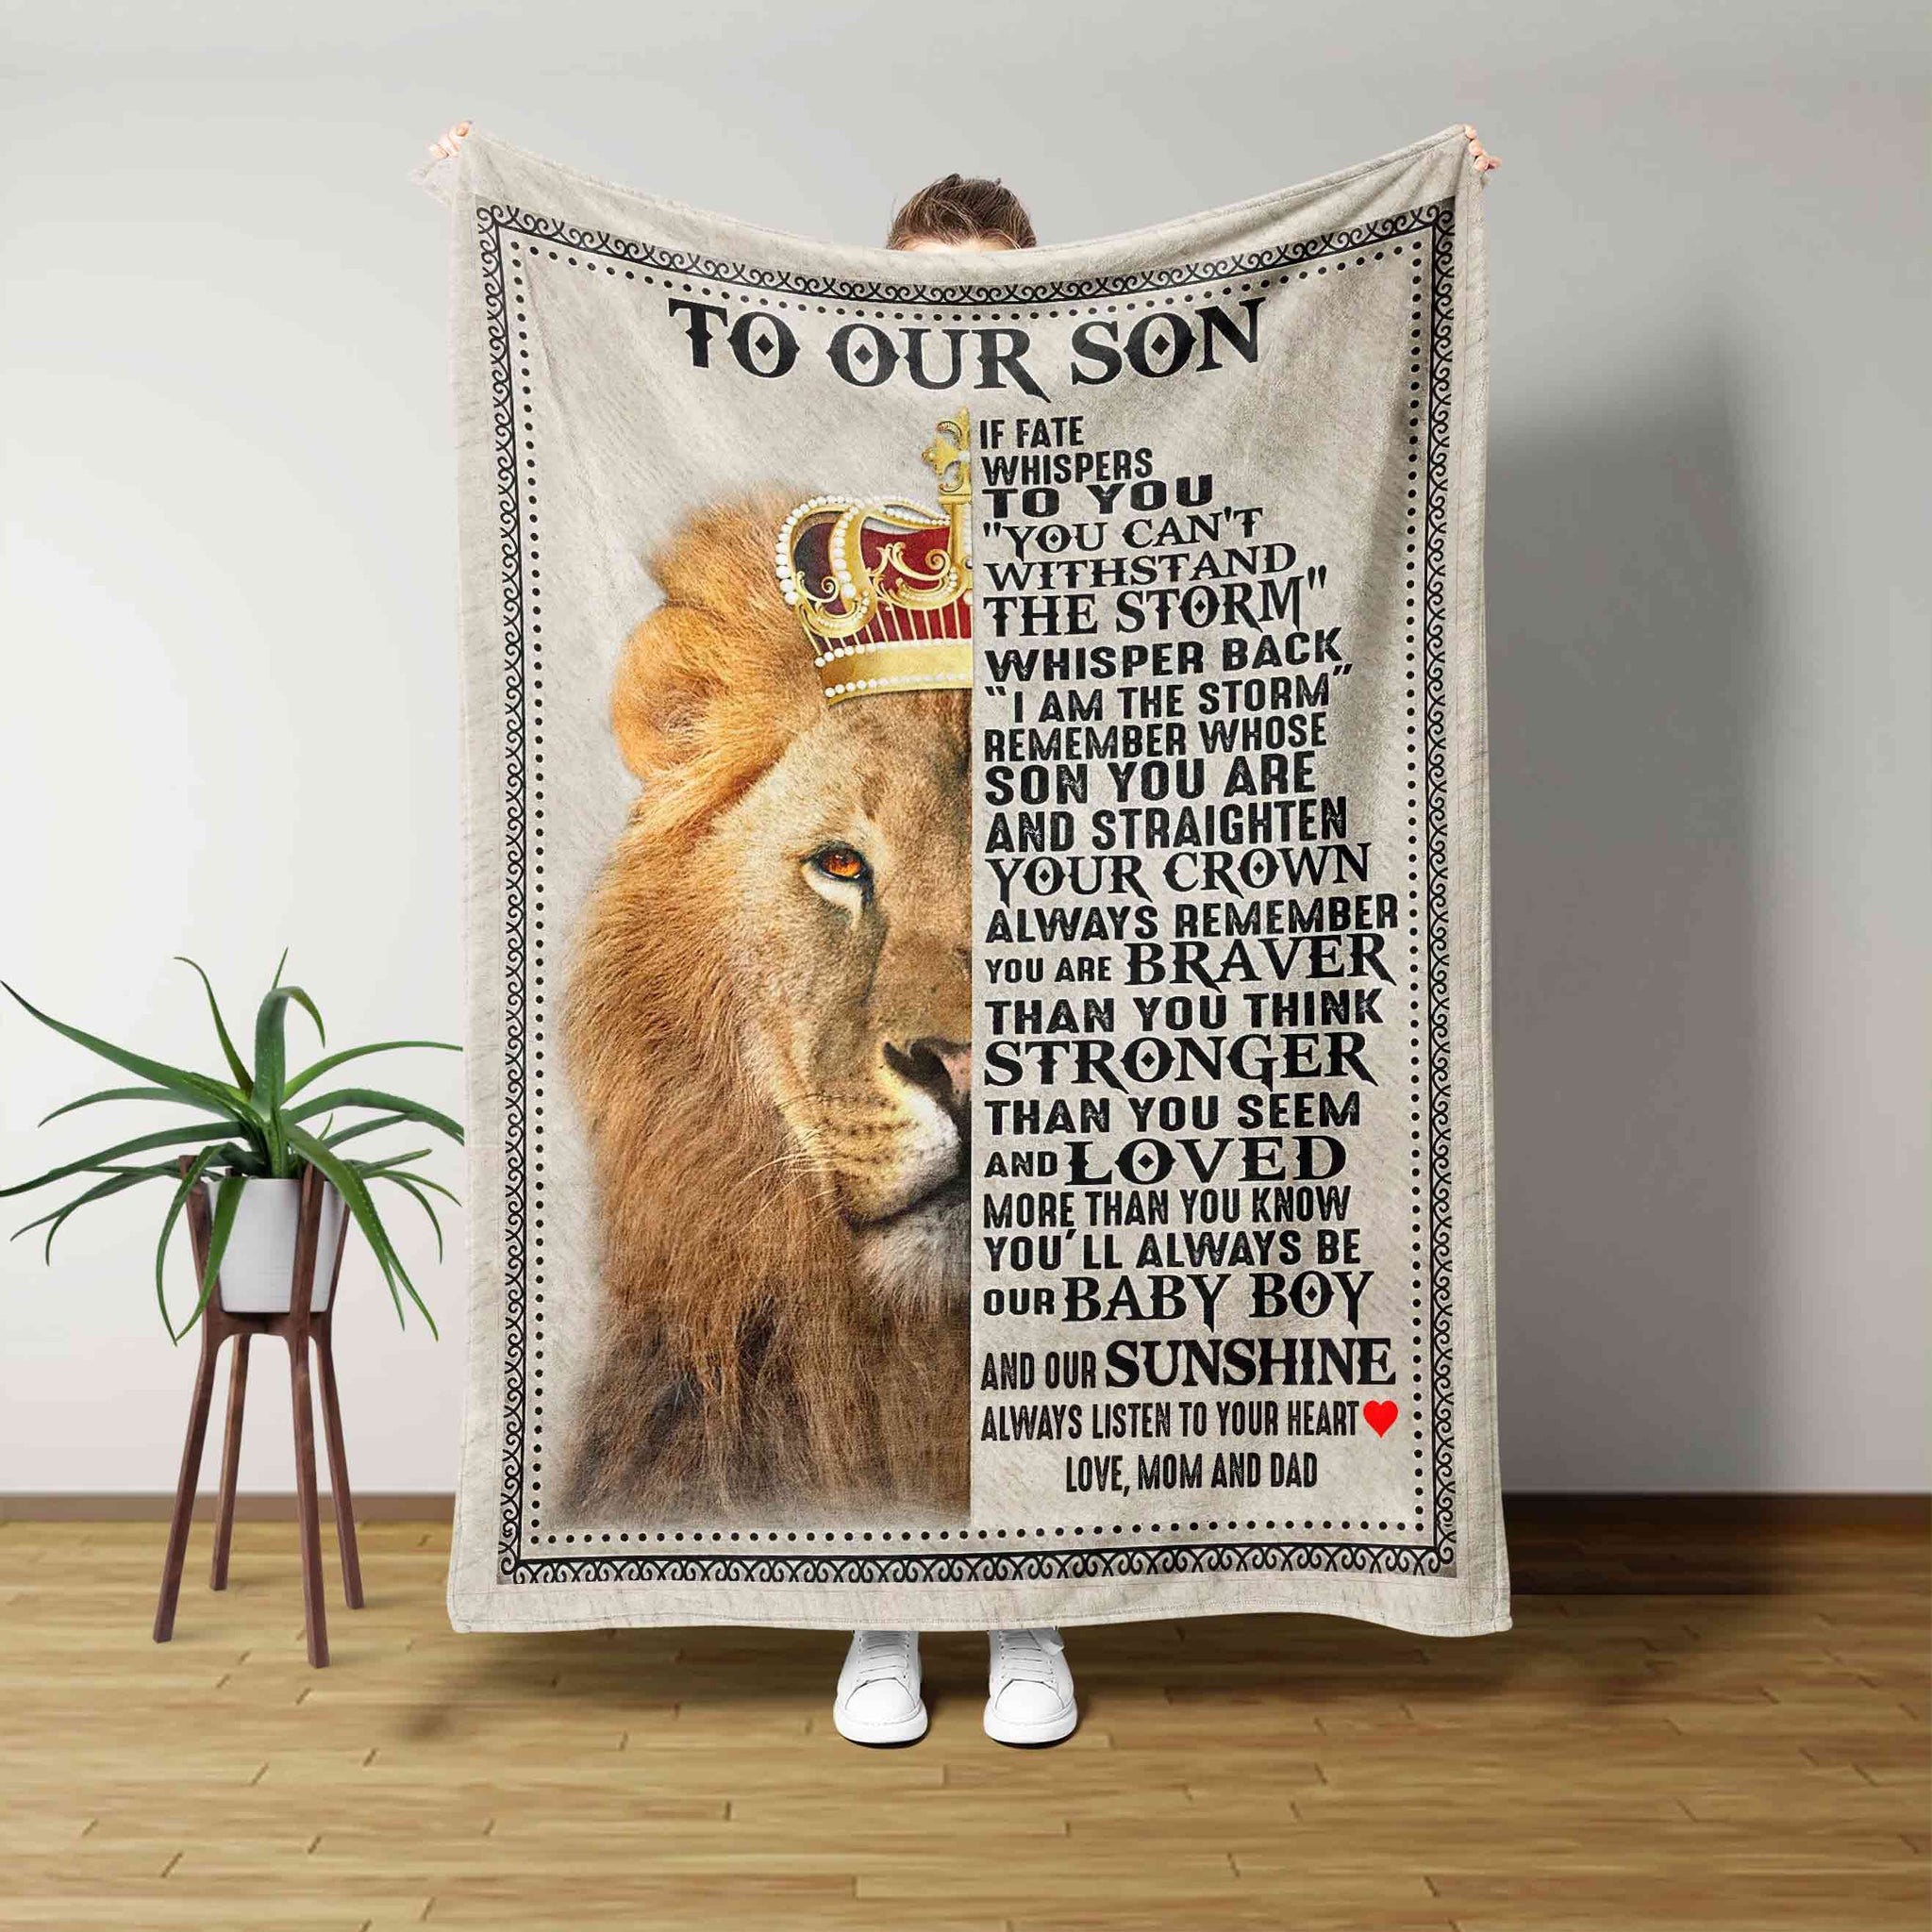 To Our Son Blanket, Lion Blanket, Crown Royal Blanket, Custom Name Blanket, Family Blanket, Gift Blanket